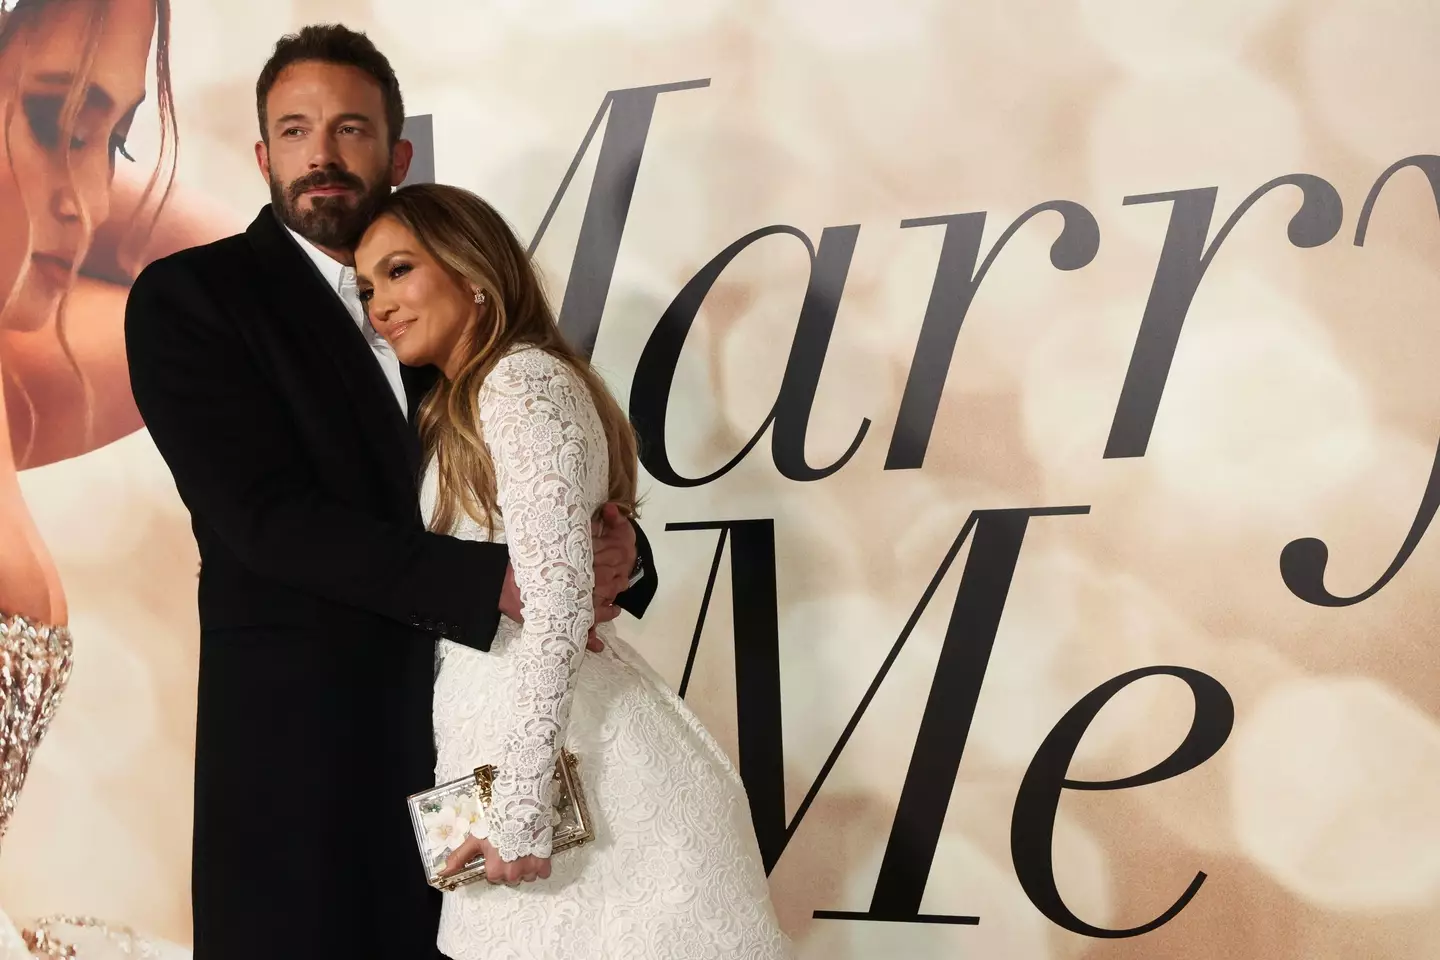 Jennifer Lopez and Ben Affleck are back together and actually married.